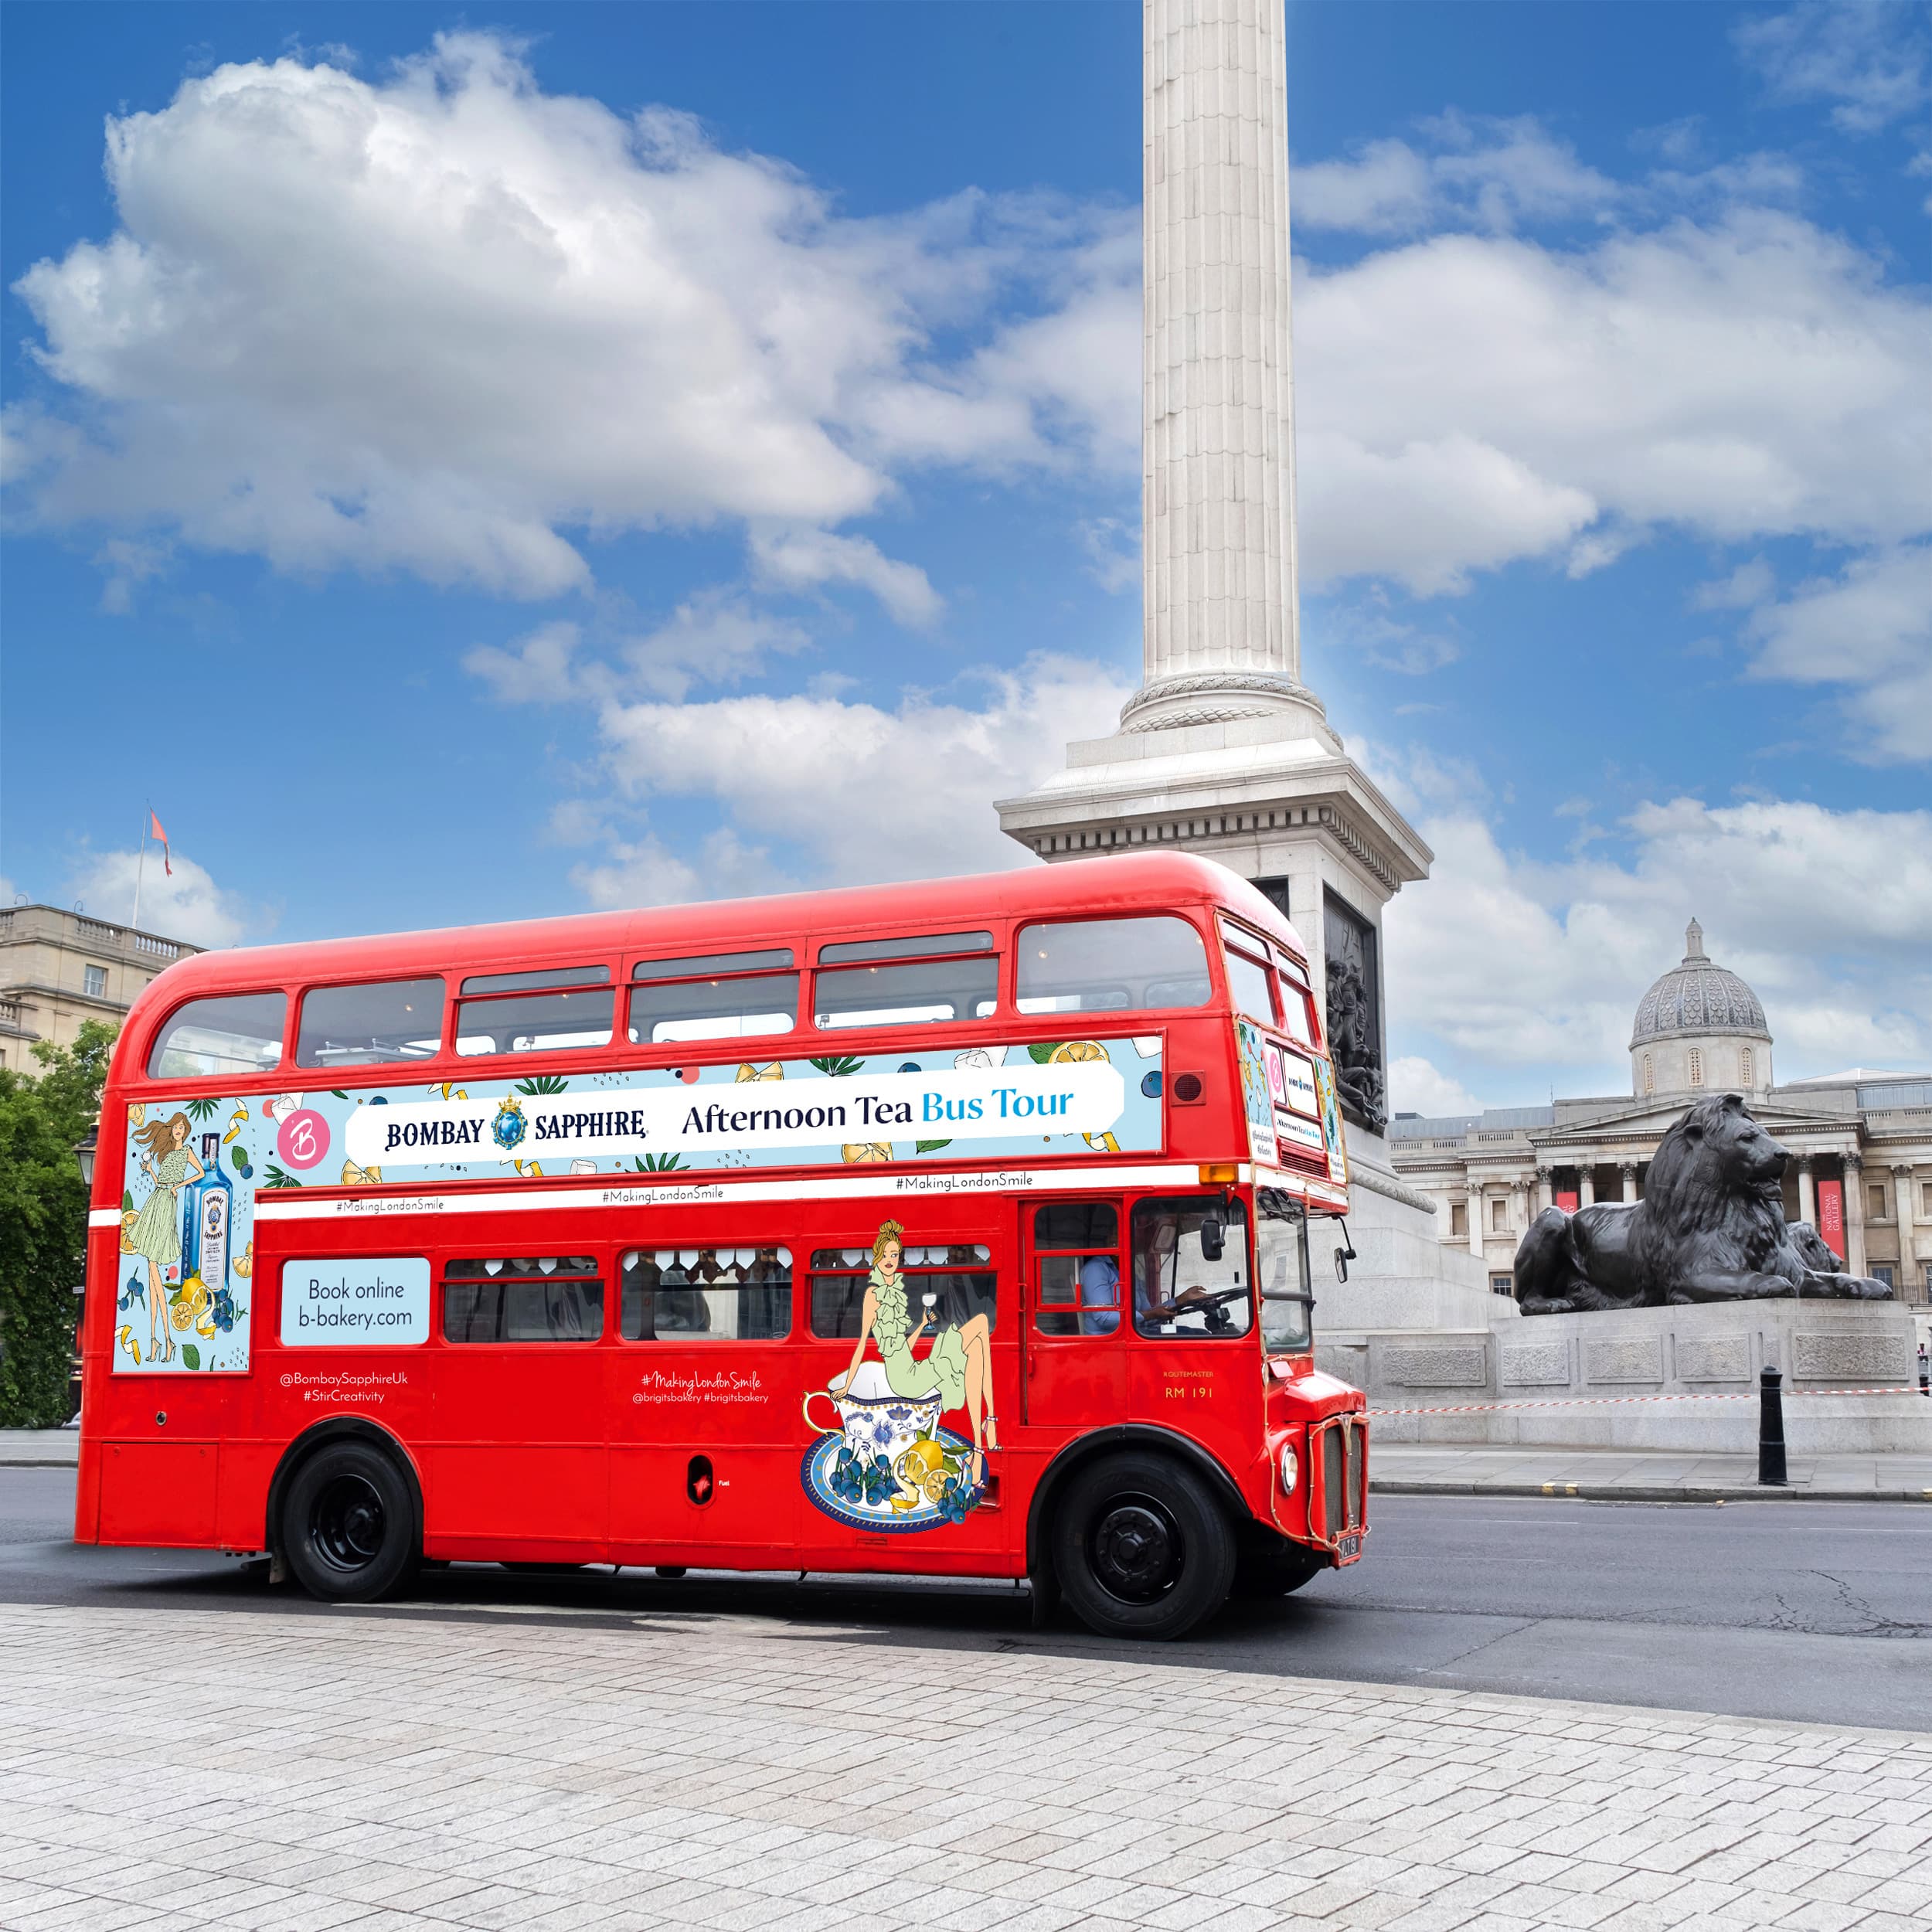 Bombay Sapphire Afternoon Tea Bus Tour Launches with Brigit's Bakery